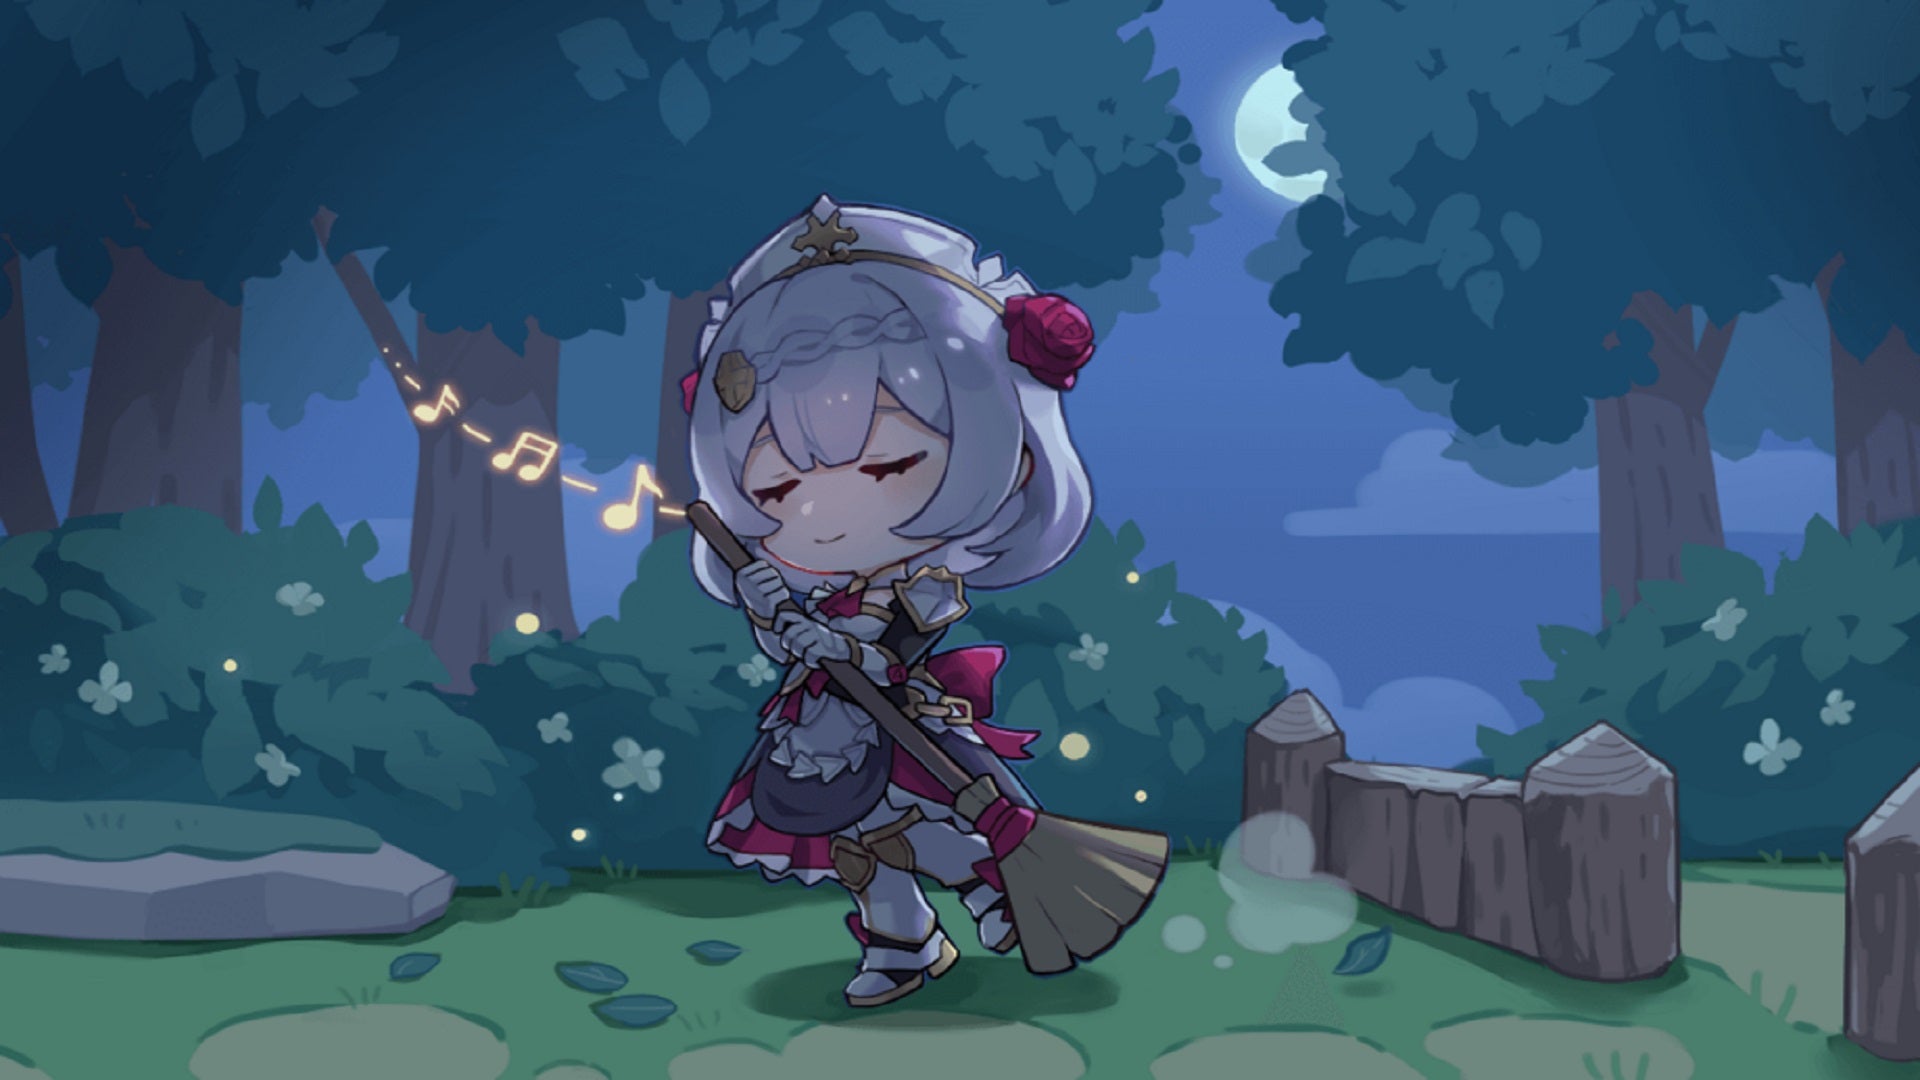 A chibi interpretation of Genshin Impact's Noelle singing to herself and sweeping in a moonlit garden. The artwork is from a past in-game event.